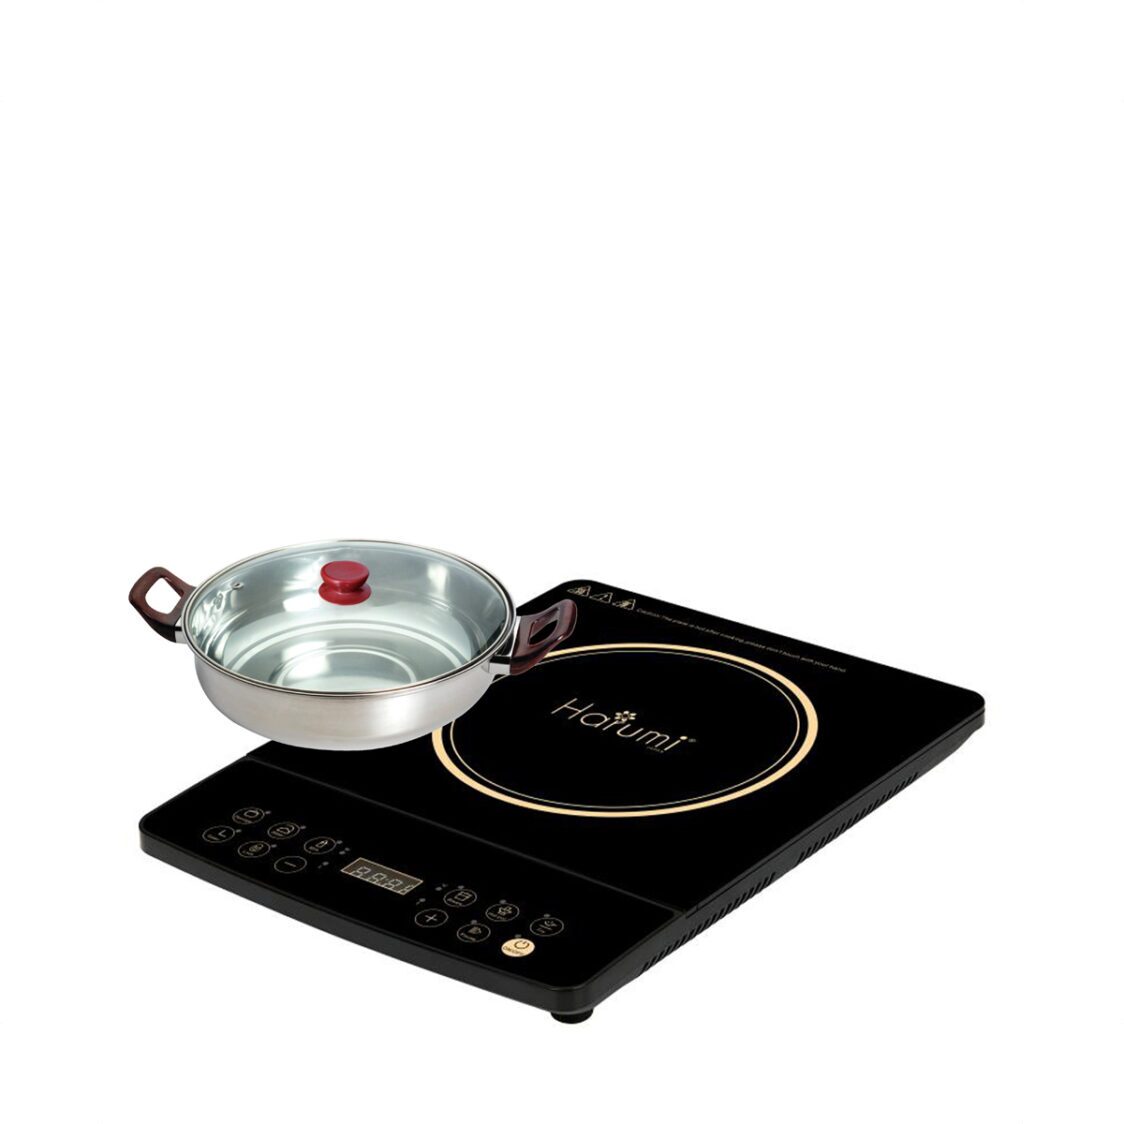 Harumi Induction Cooker with Free Pot